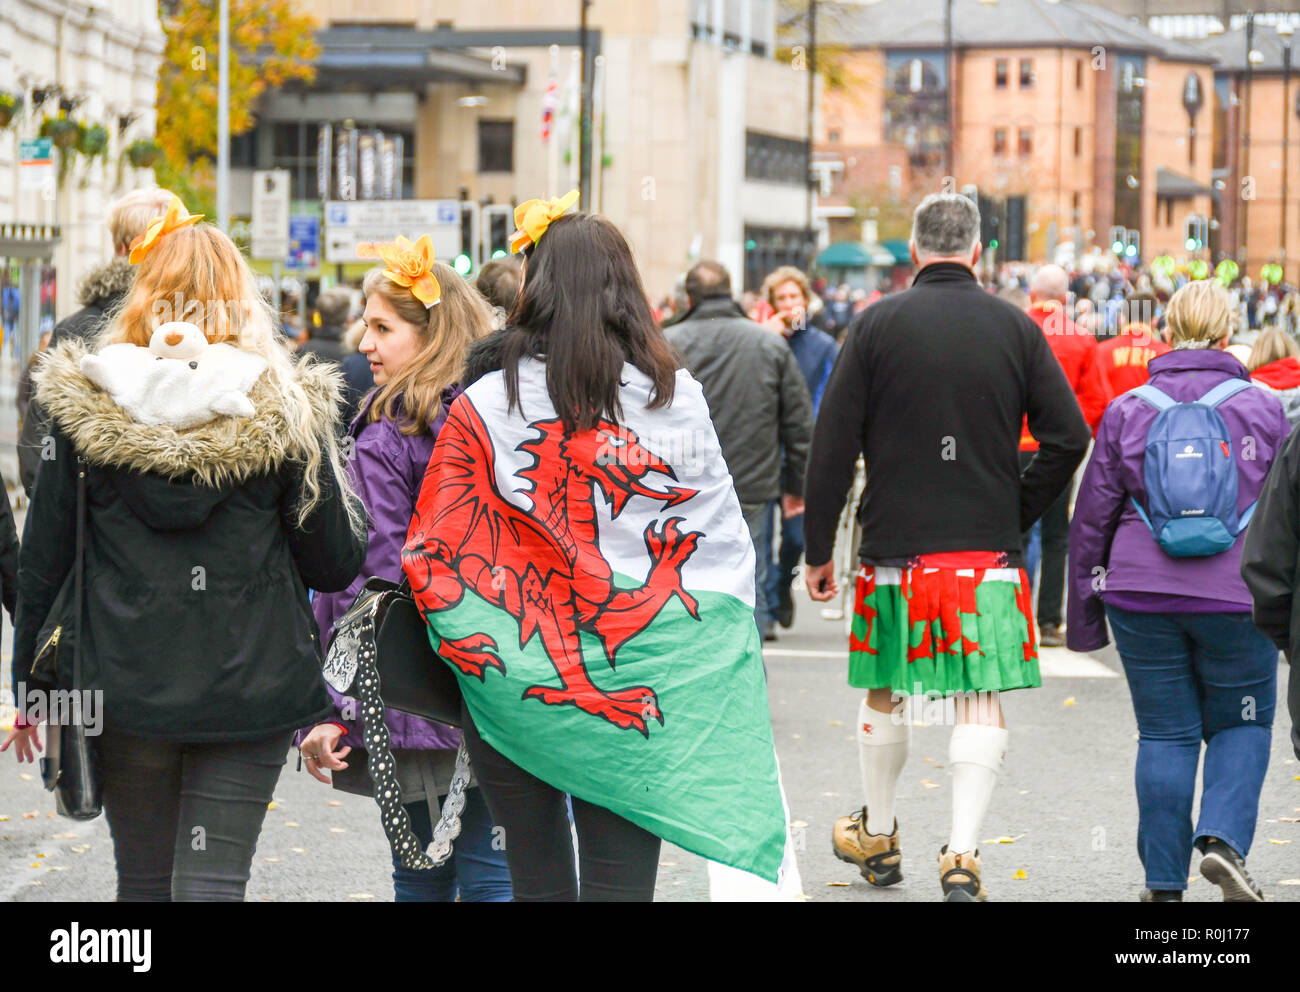 CARDIFF, WALES - NOVEMBER 2018: Female supporter with a Welsh flag, the 'Red Dragon', draped over her shoulders in Cardiff city centre on the day of a Stock Photo